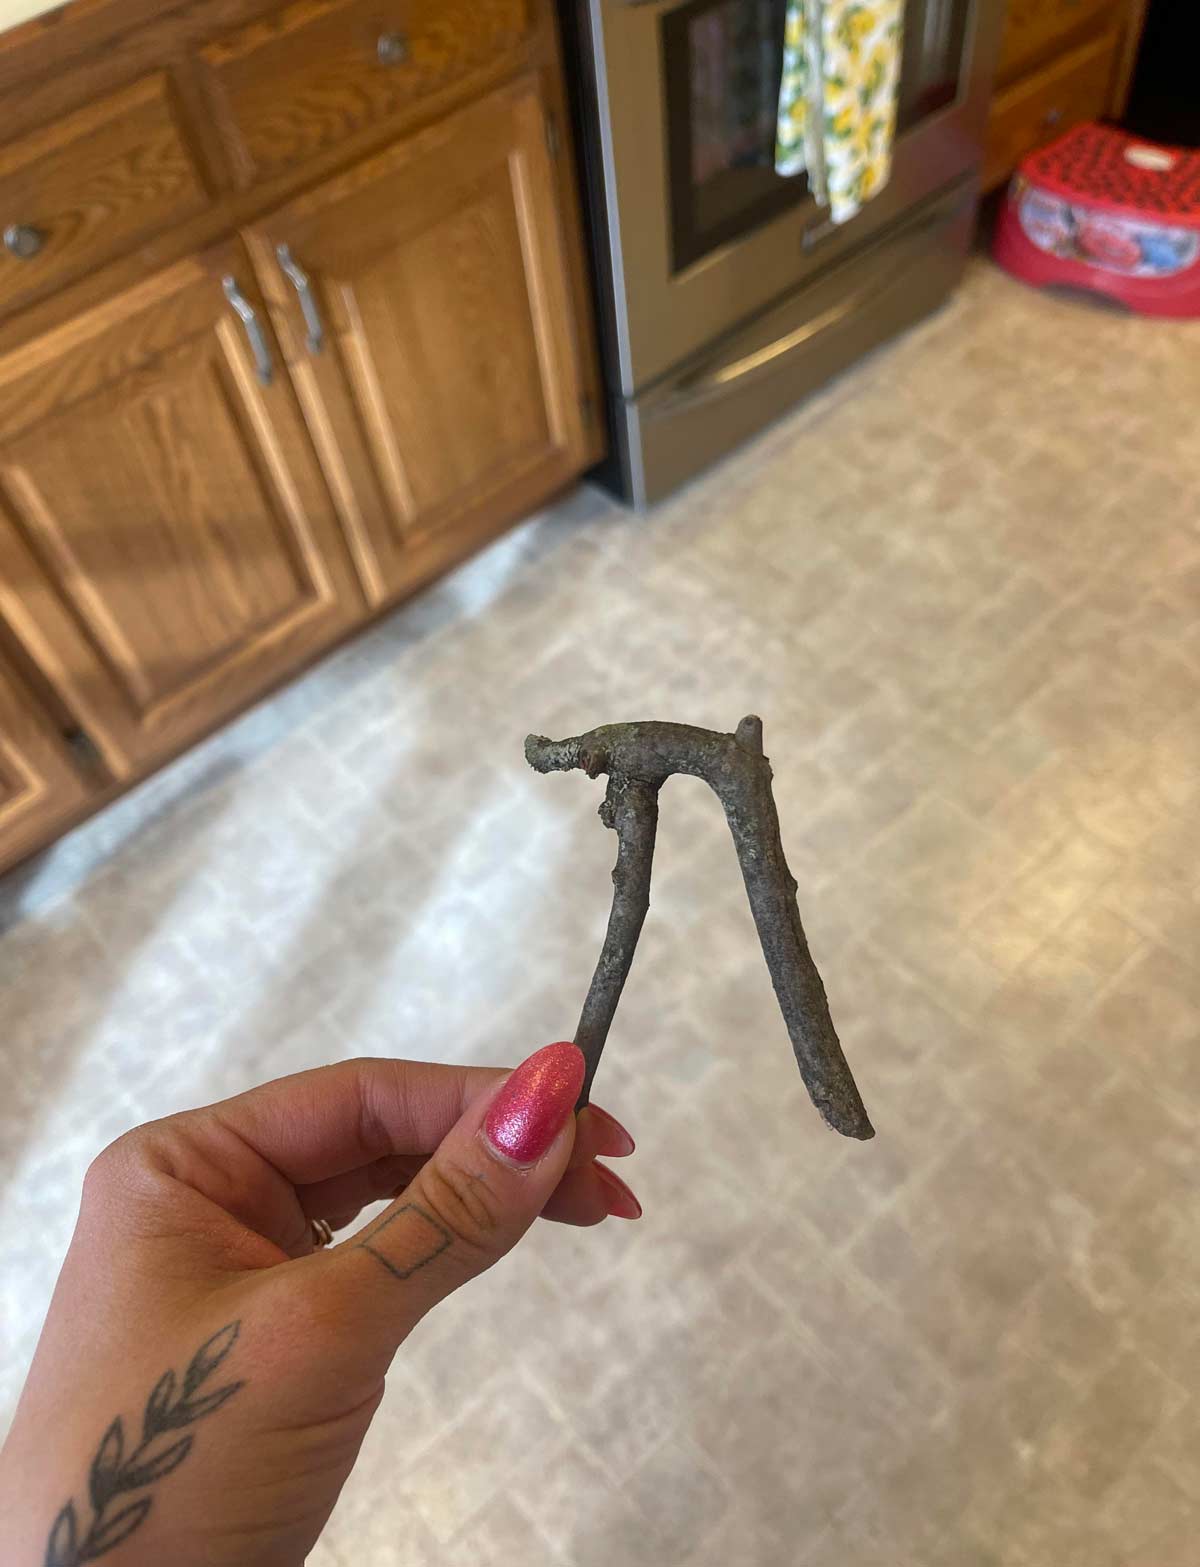 My kid came home from the bus stop and declared that he had found a "stick of pie", and needless to say, I was really confused. Then he pulled this from his jacket..